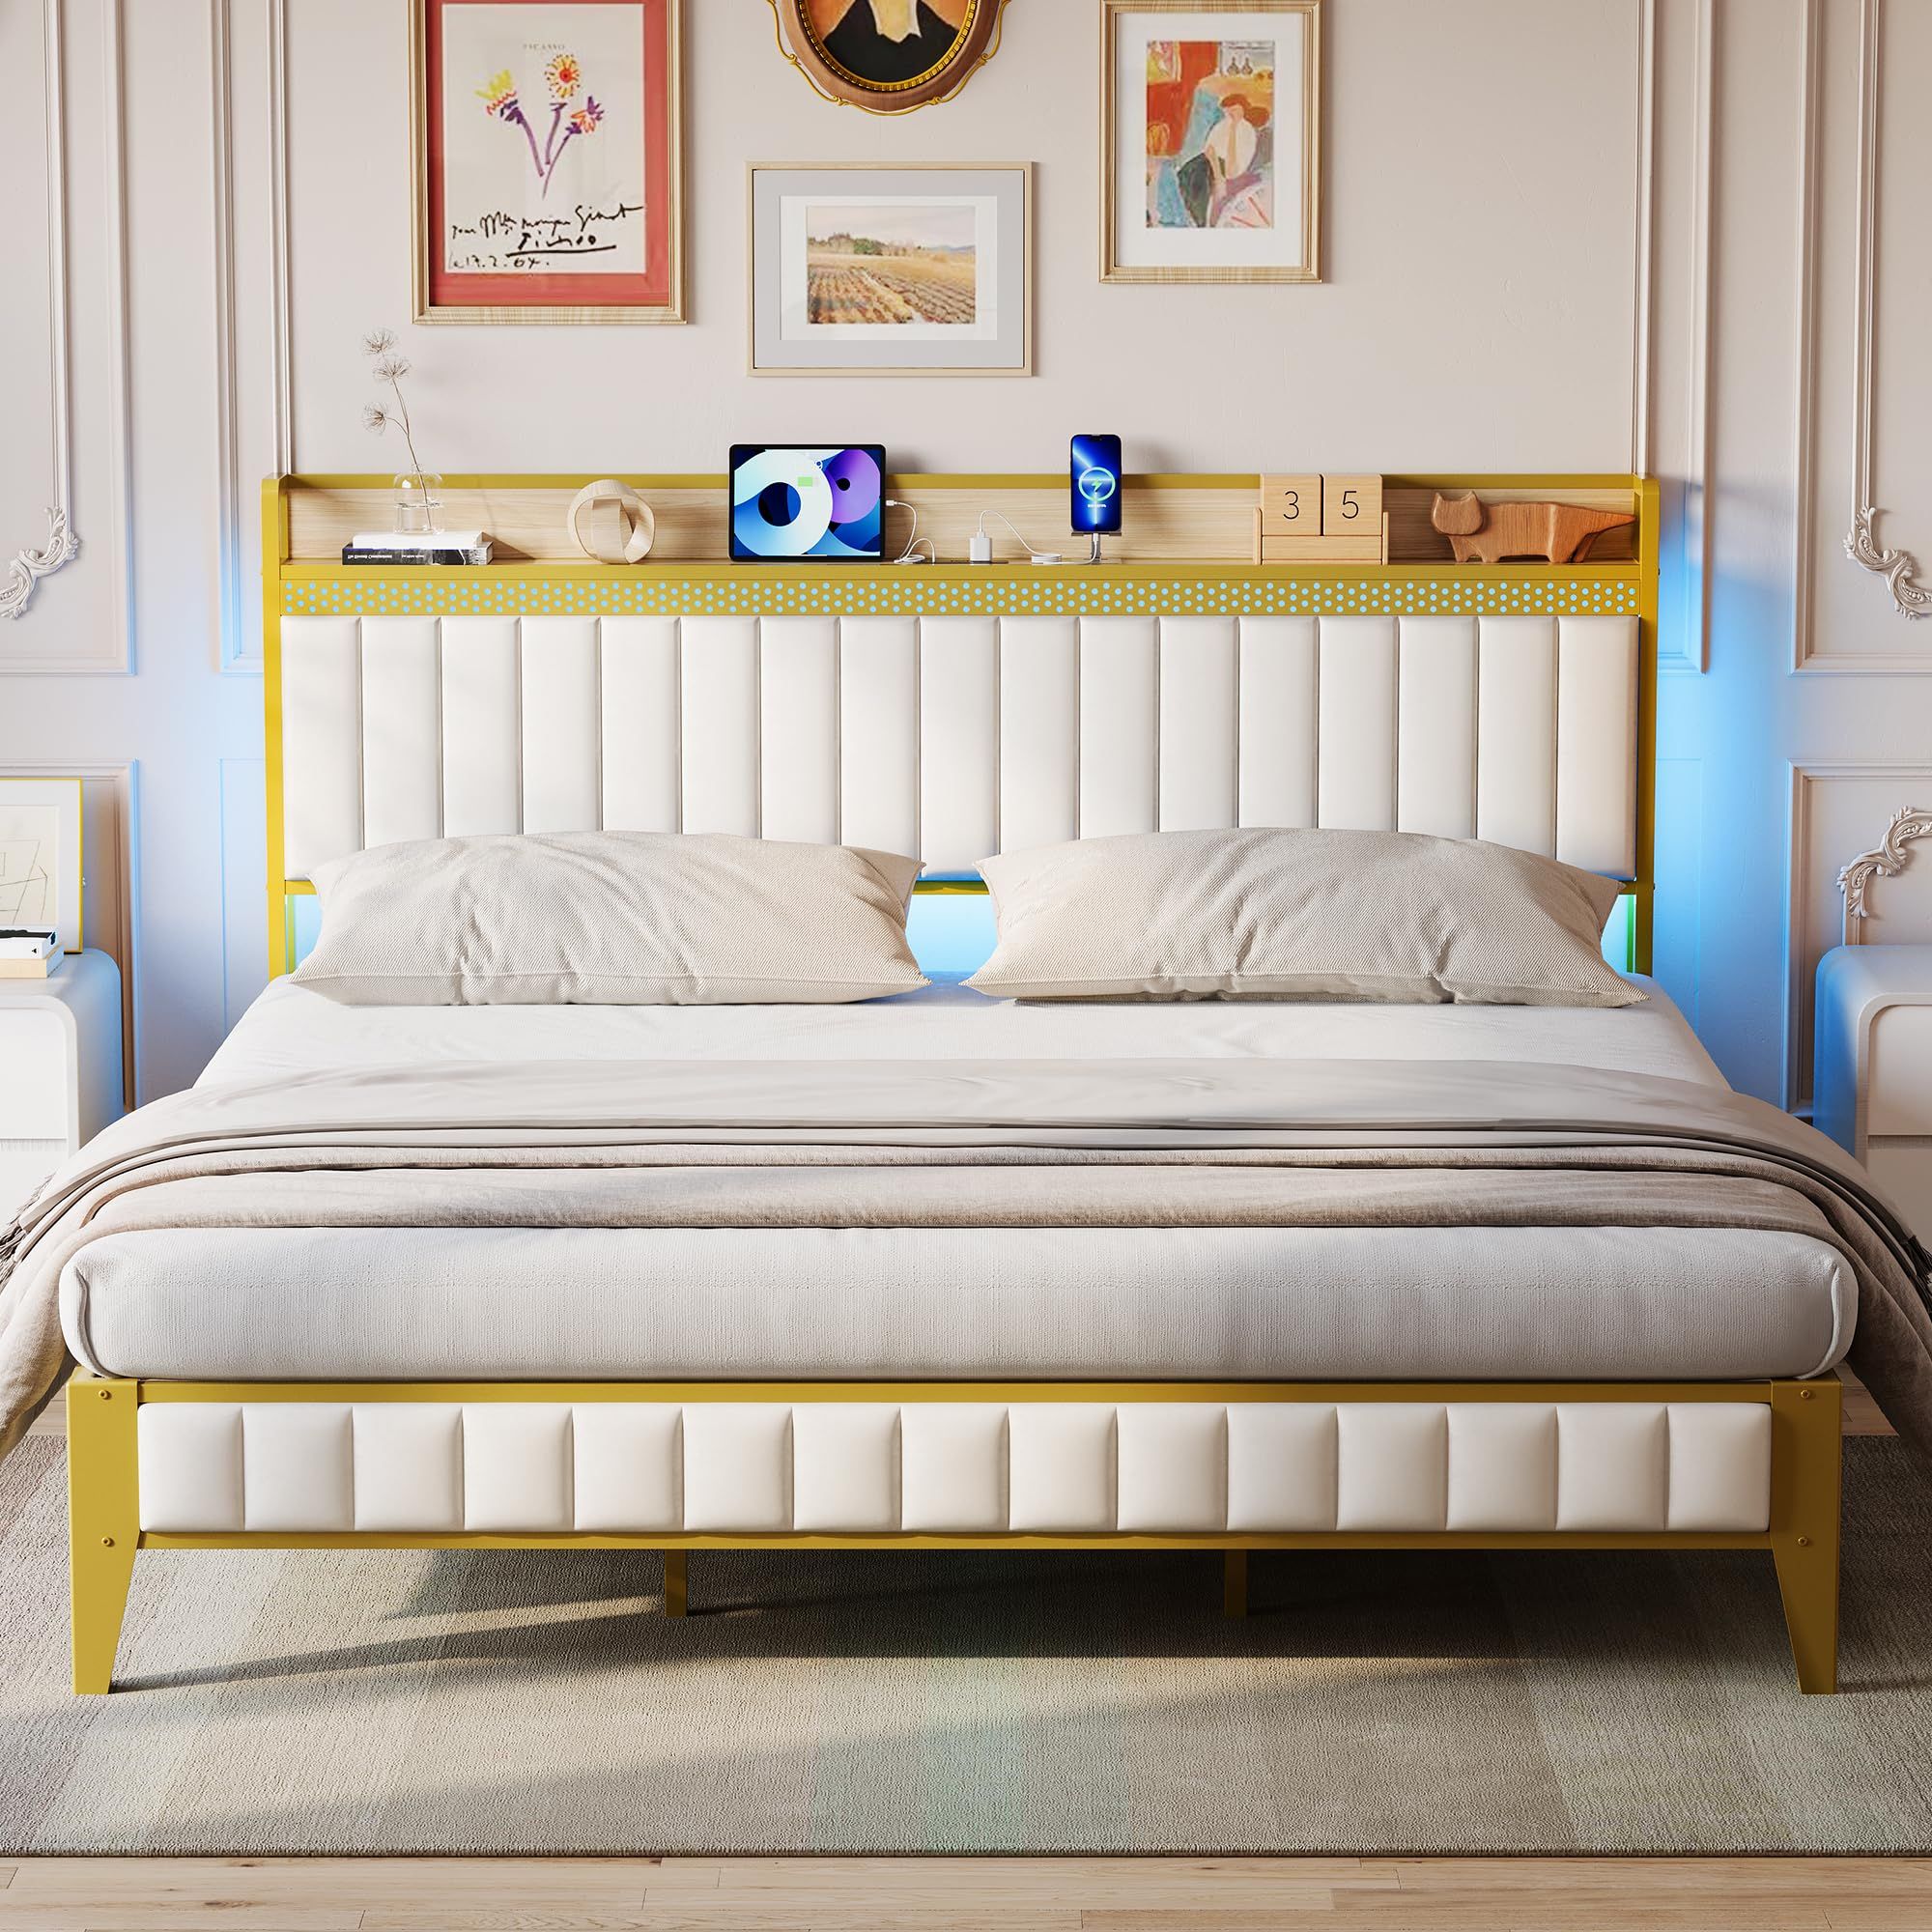 Upgrade Your Bed with a Luxurious King Size Headboard and Frame